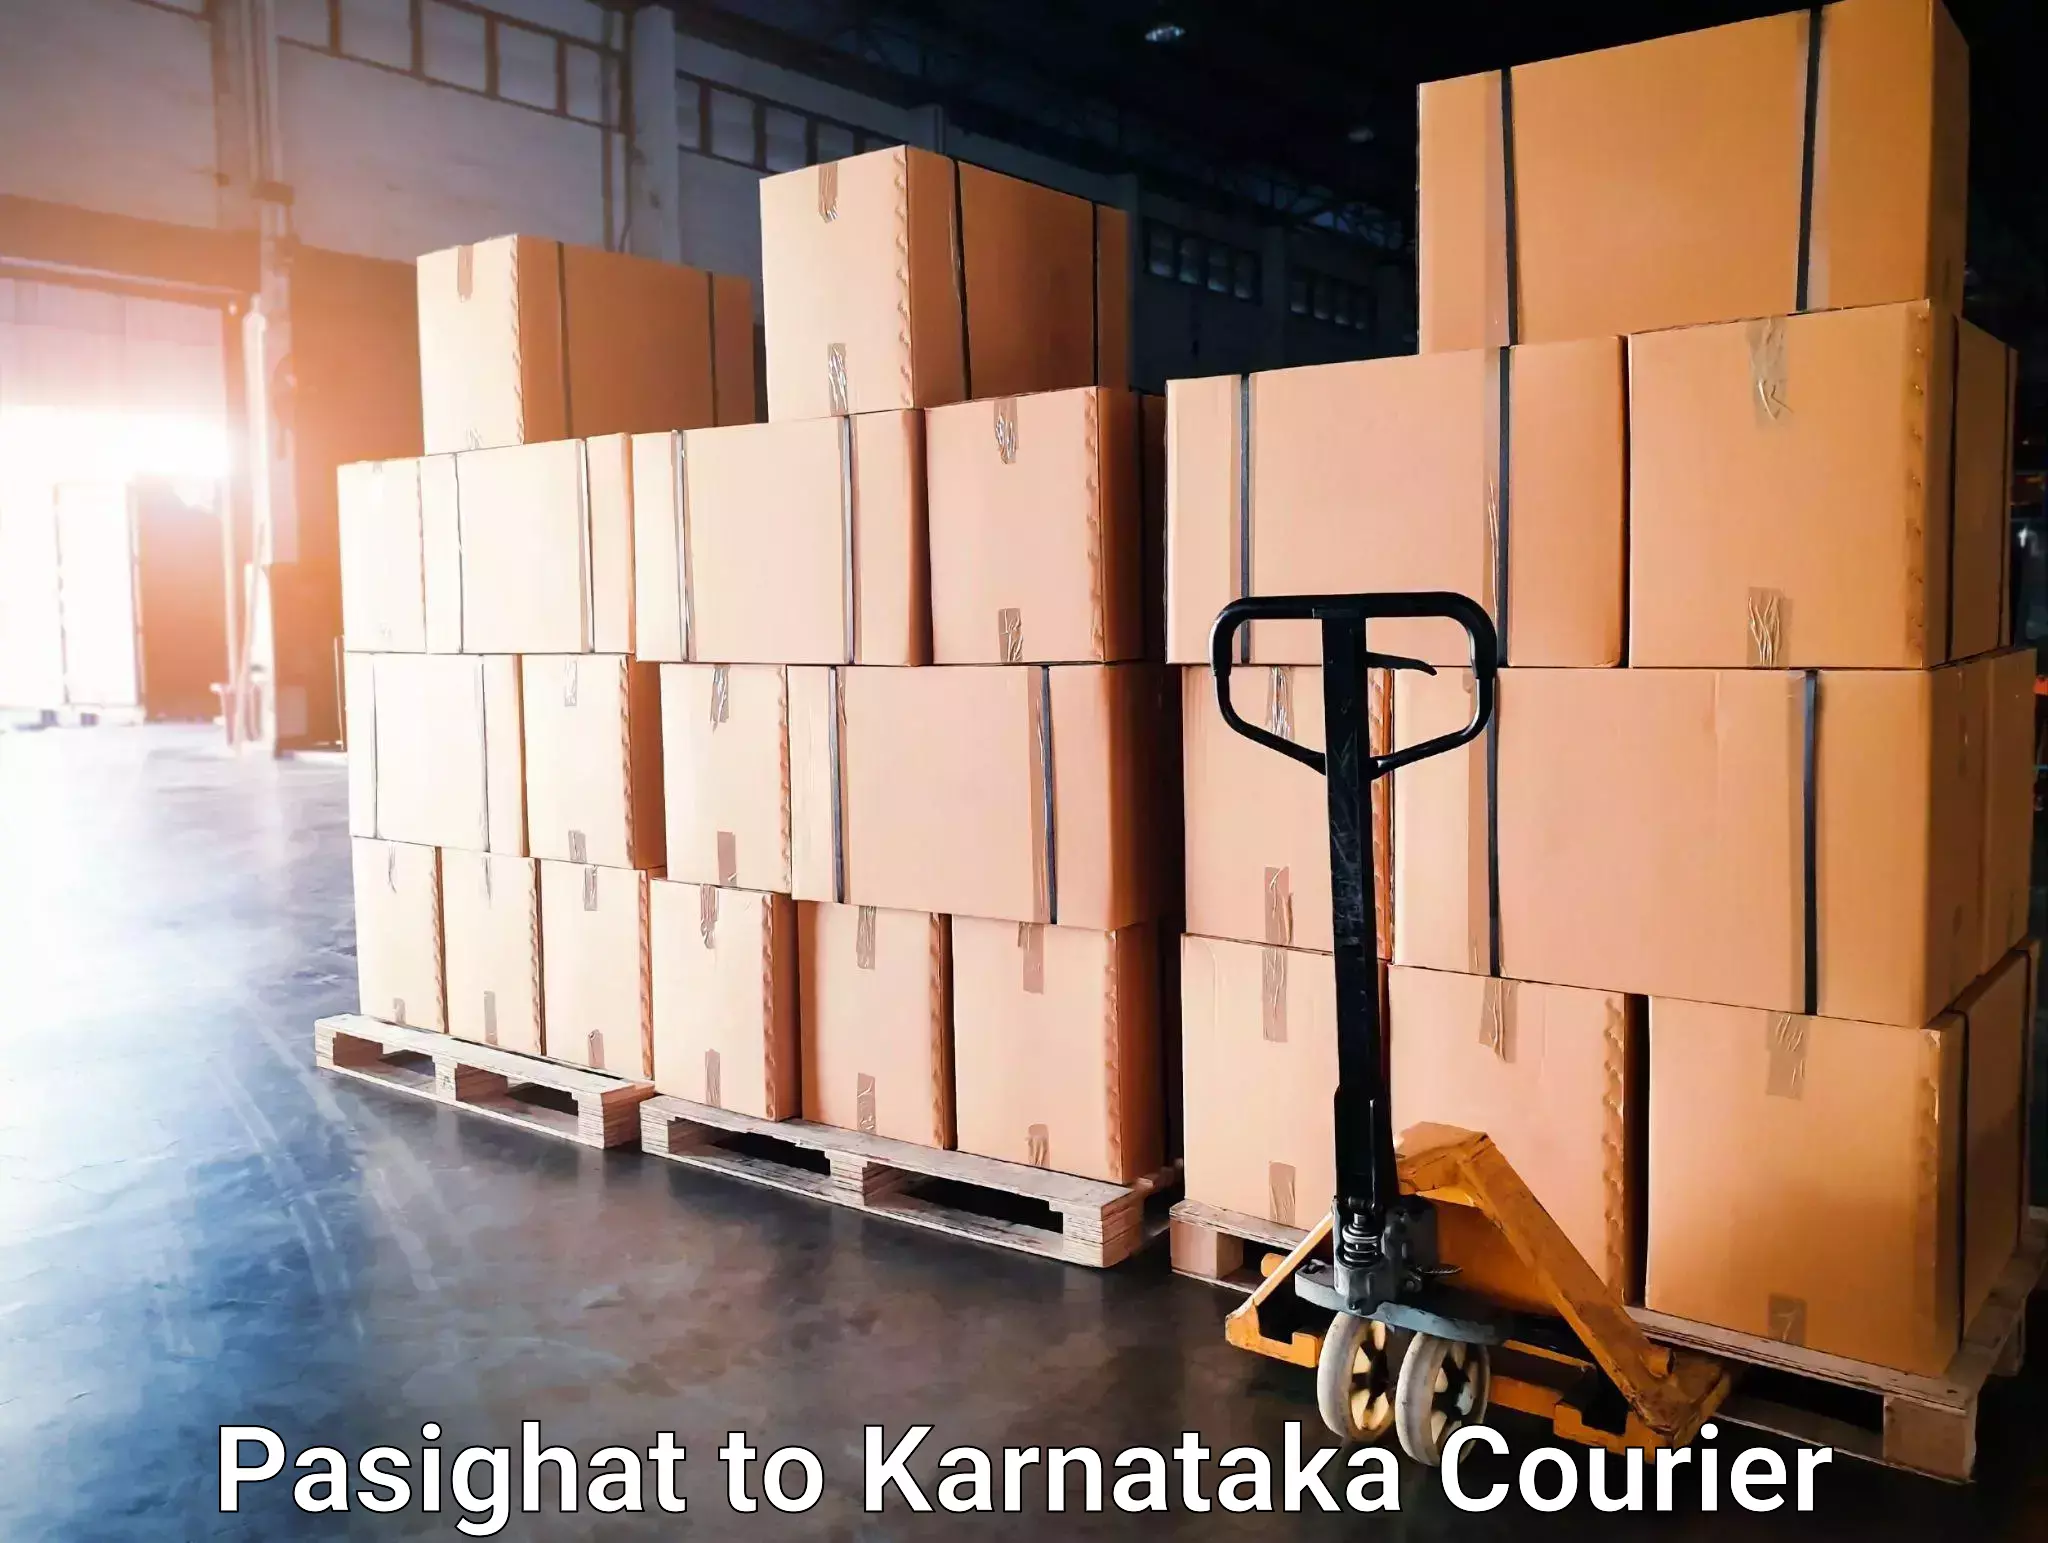 Expedited shipping methods Pasighat to Sirsi